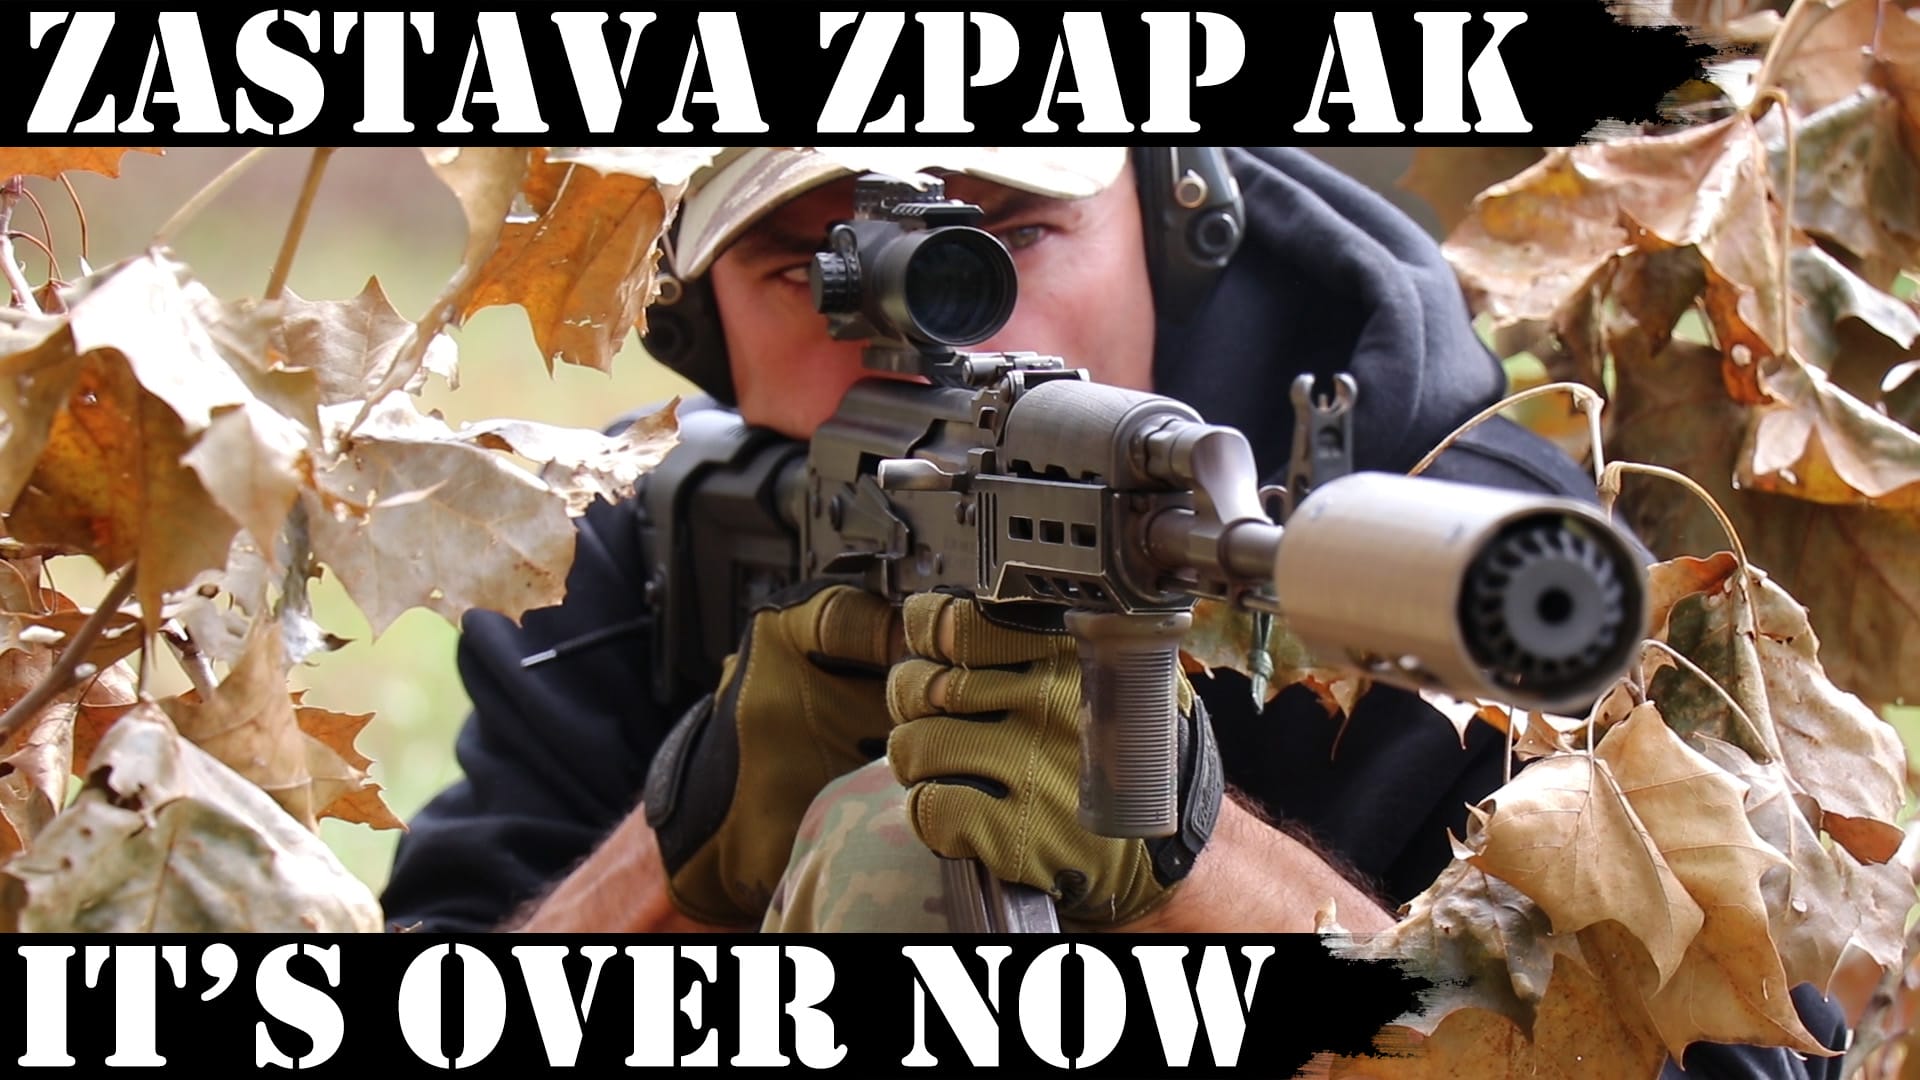 Zastava ZPAP AK: It’s Over Now! 5000 rds Later!